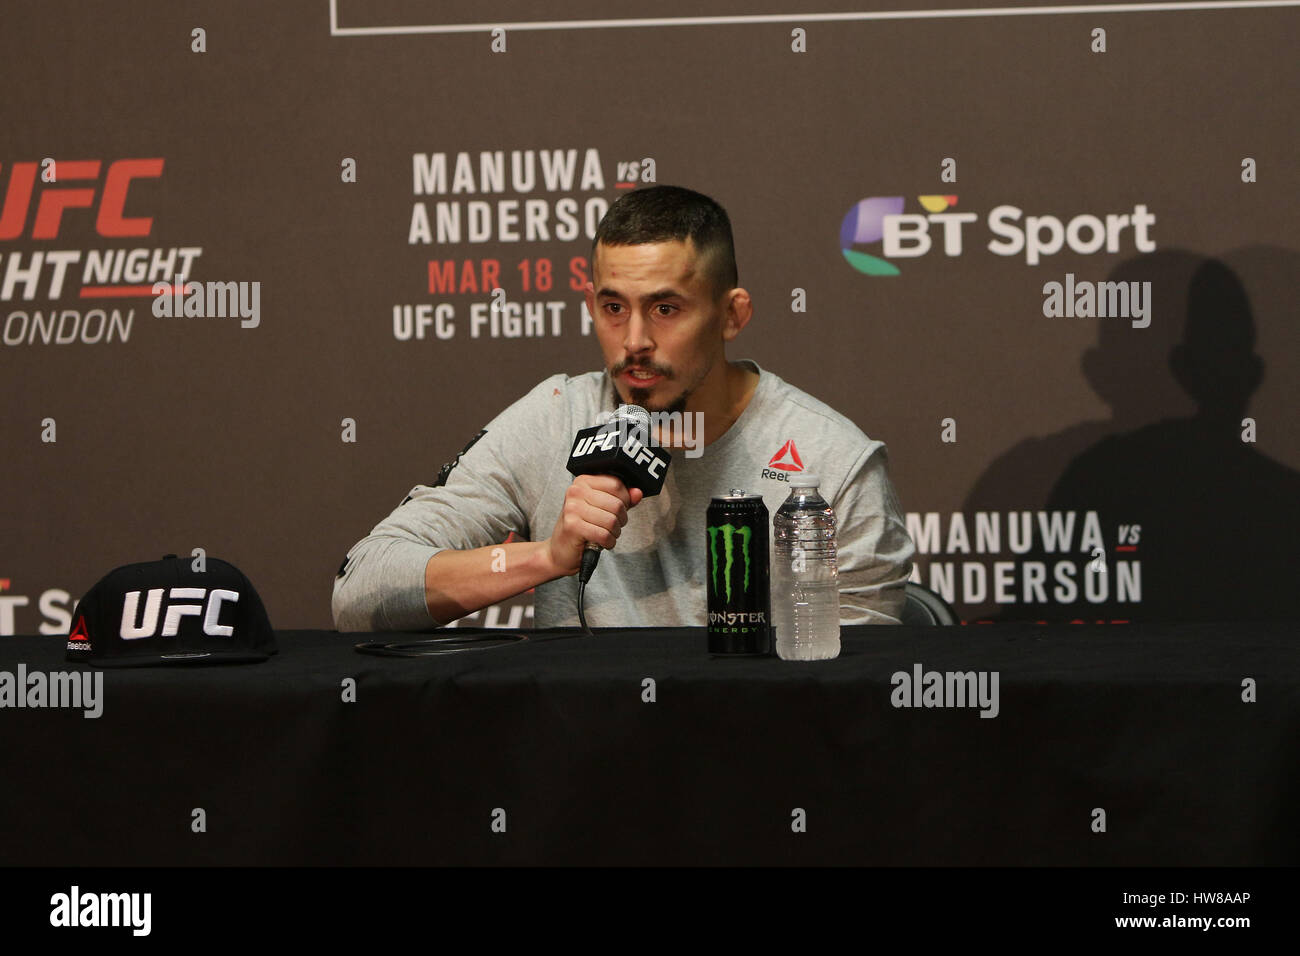 O2 Arena , London, England. 18 March 2017. Marlon Vera takes questions from the press in the post fight press conference during UFC Fight Night 107: London  Credit: Dan Cooke/Alamy Live News Stock Photo